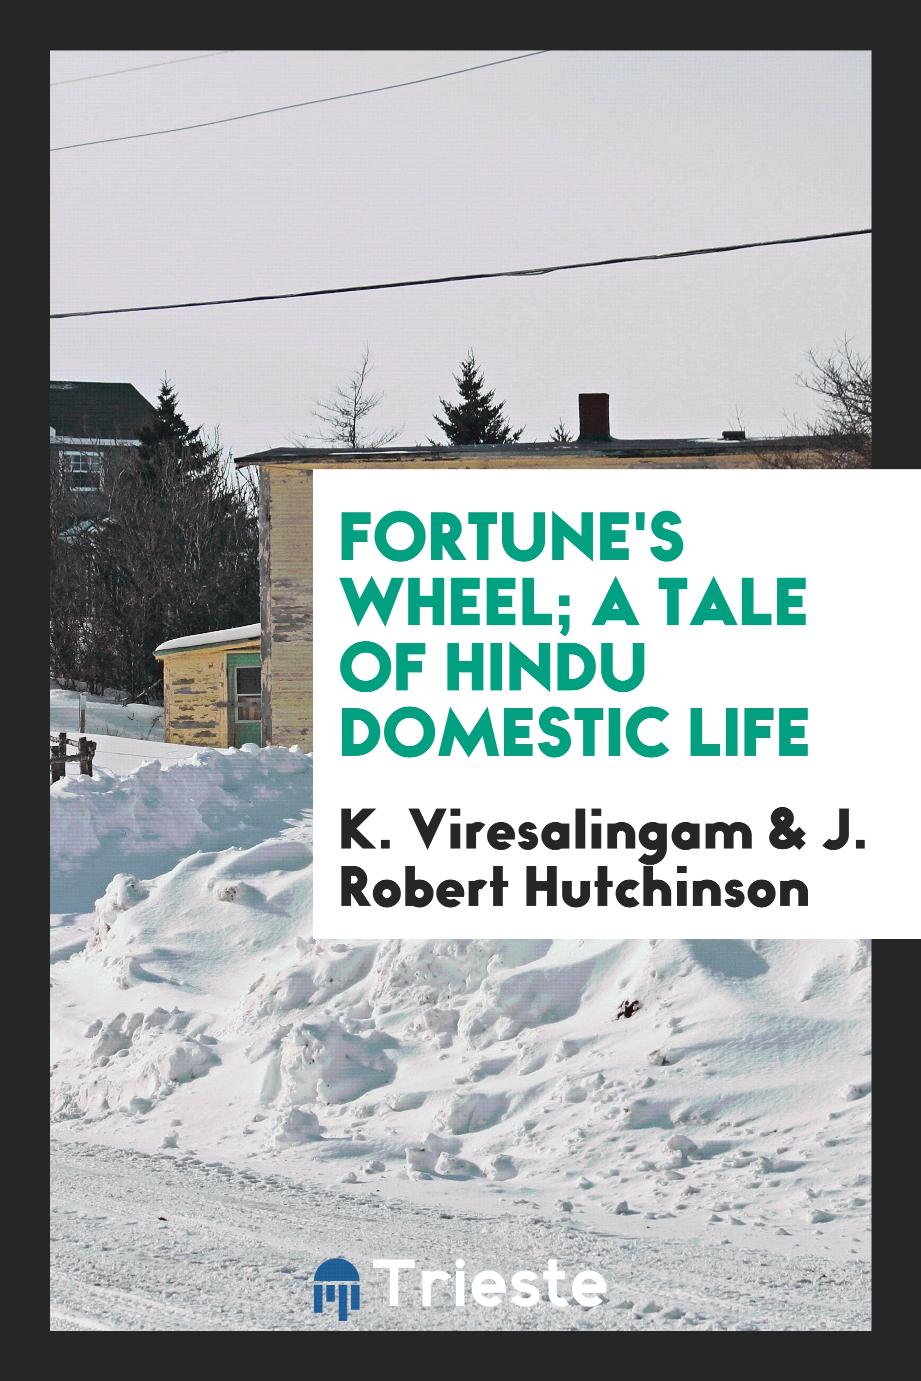 Fortune's wheel; a tale of Hindu domestic life